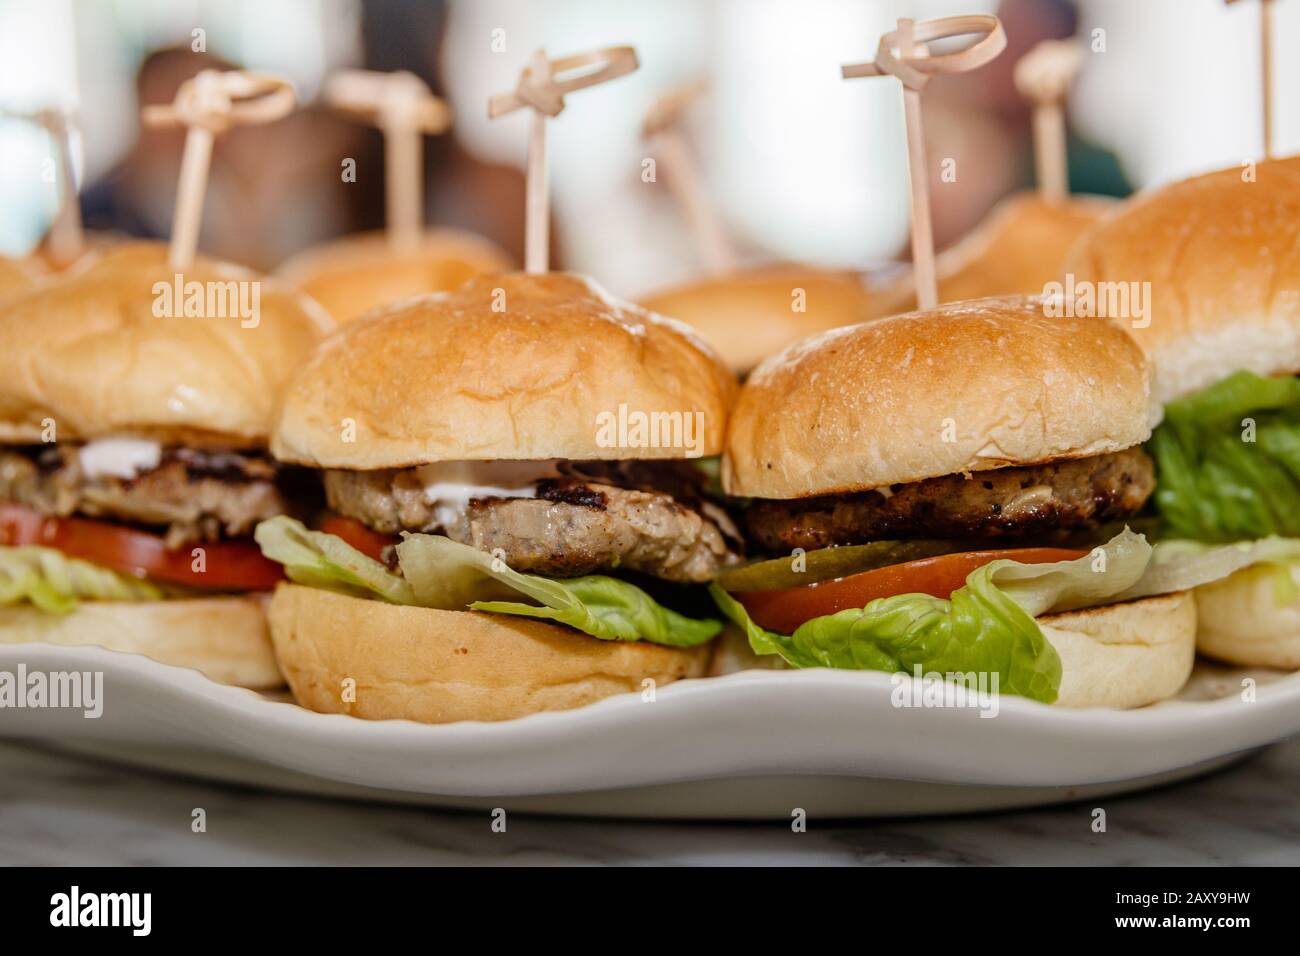 Burgers with beef patty, fresh tomato, lettuce, fried onion and melted cheese held with a wooden skewer, served on a white ceramic plate. Stock Photo